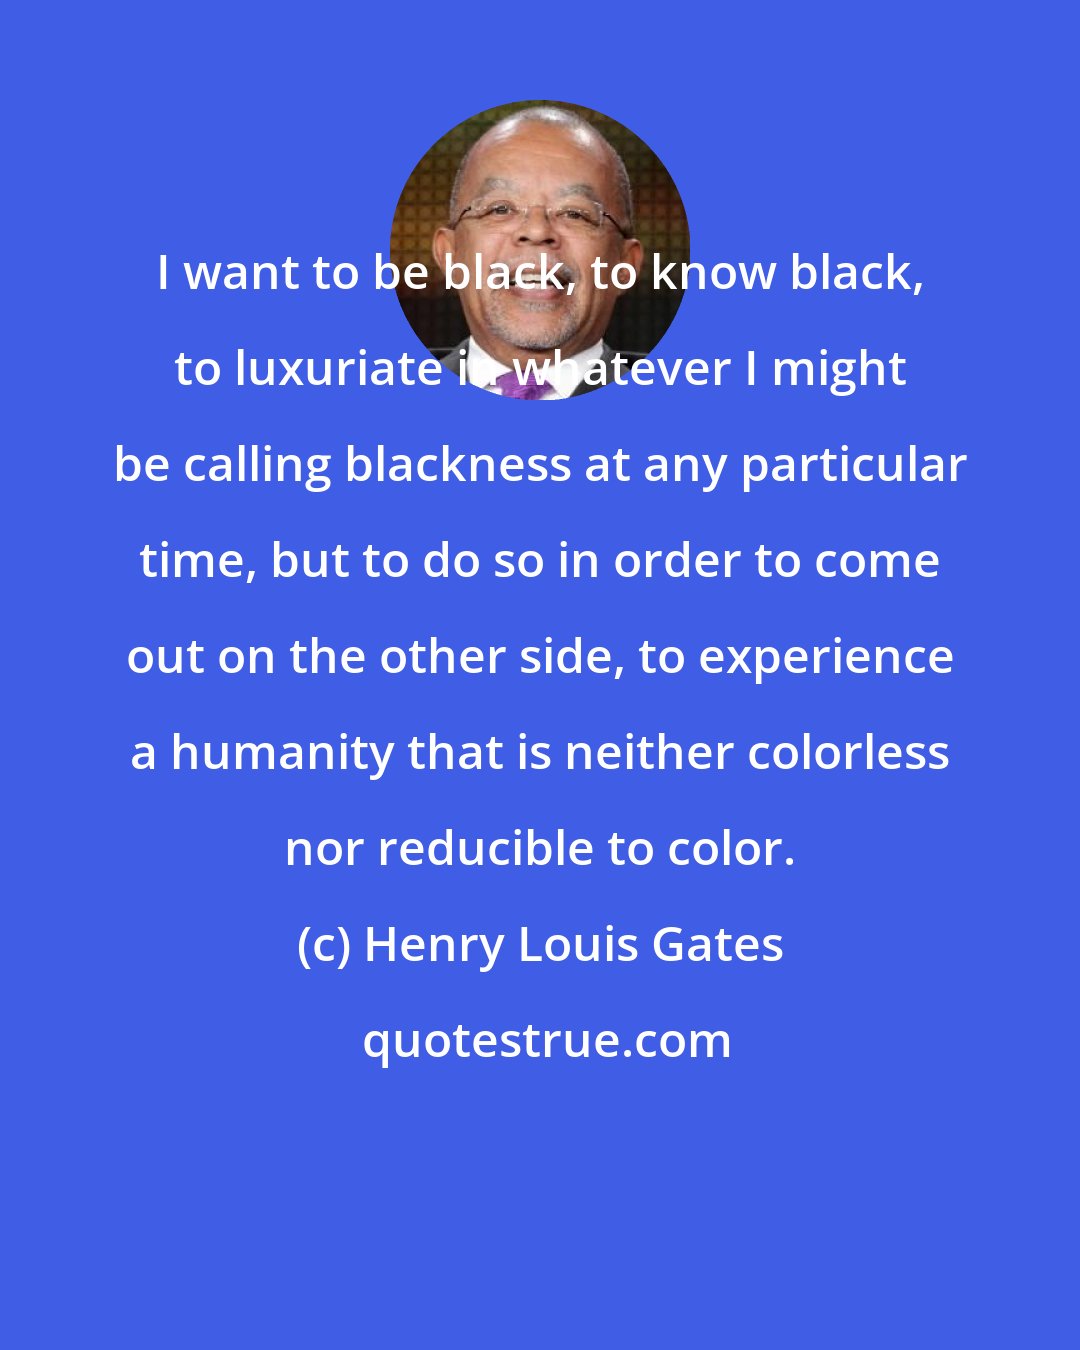 Henry Louis Gates: I want to be black, to know black, to luxuriate in whatever I might be calling blackness at any particular time, but to do so in order to come out on the other side, to experience a humanity that is neither colorless nor reducible to color.